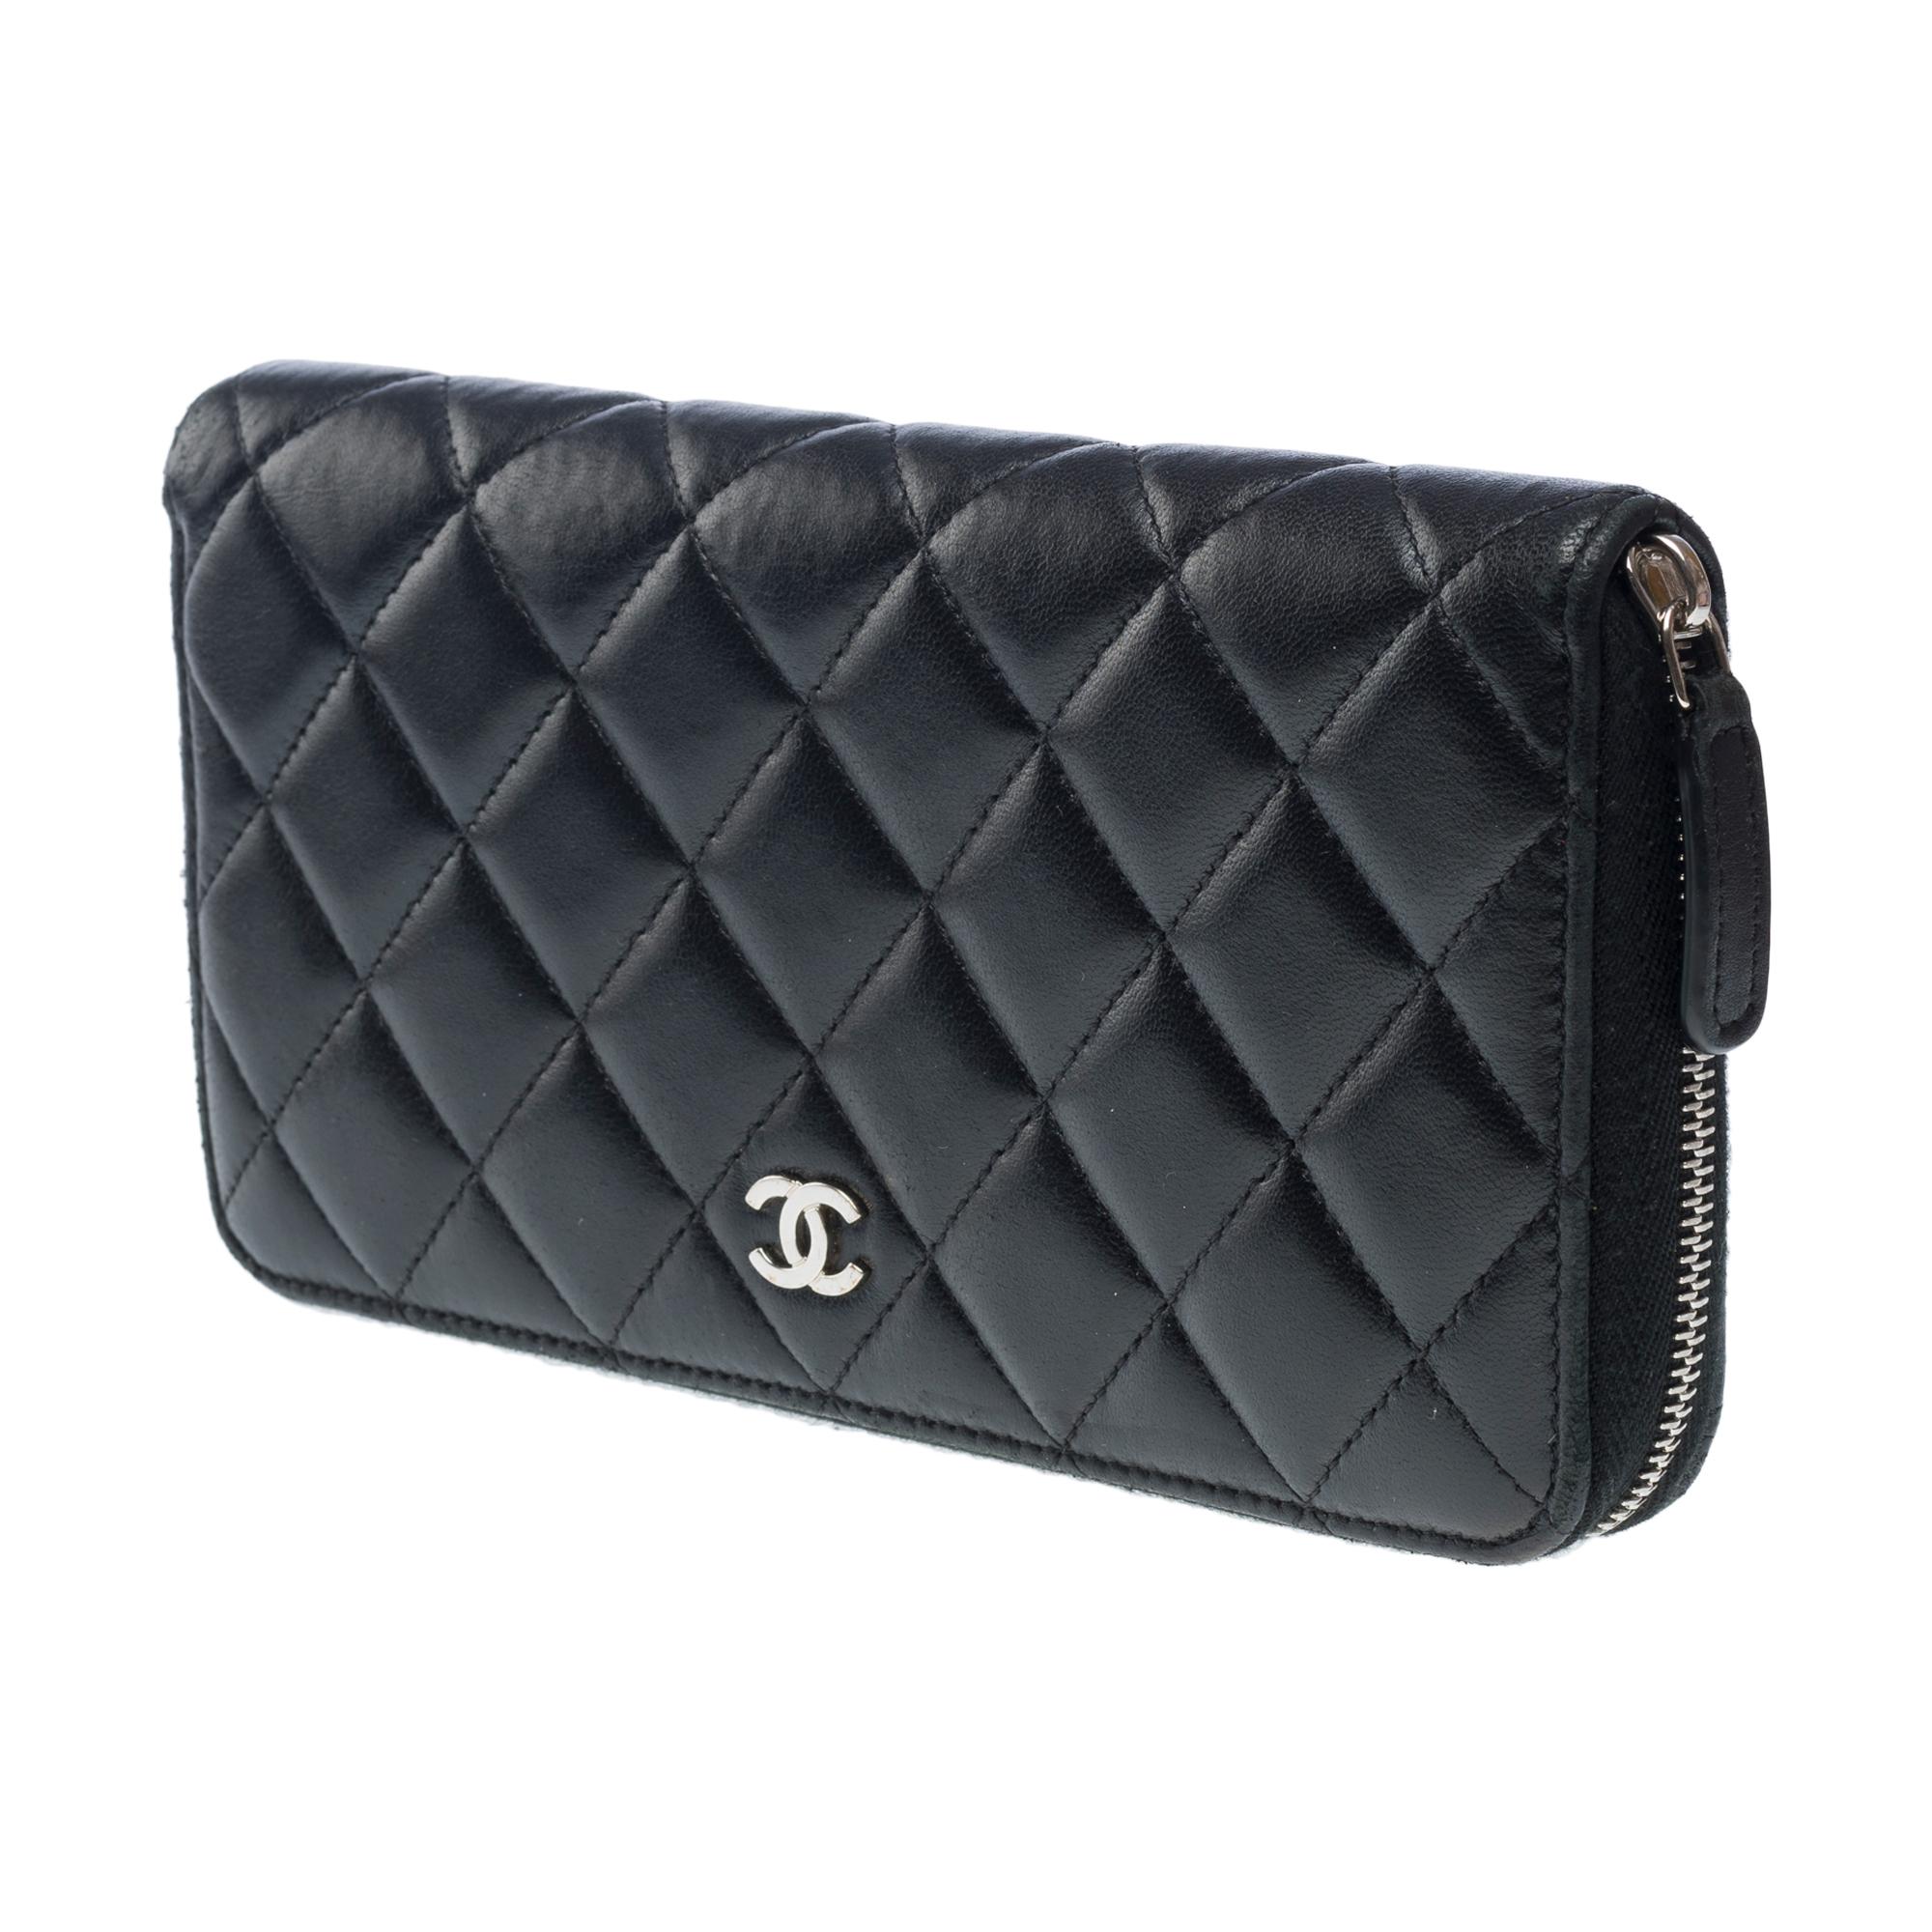 Lovely Chanel Compagnon Wallet in black quilted lambskin leather, SHW For Sale 1